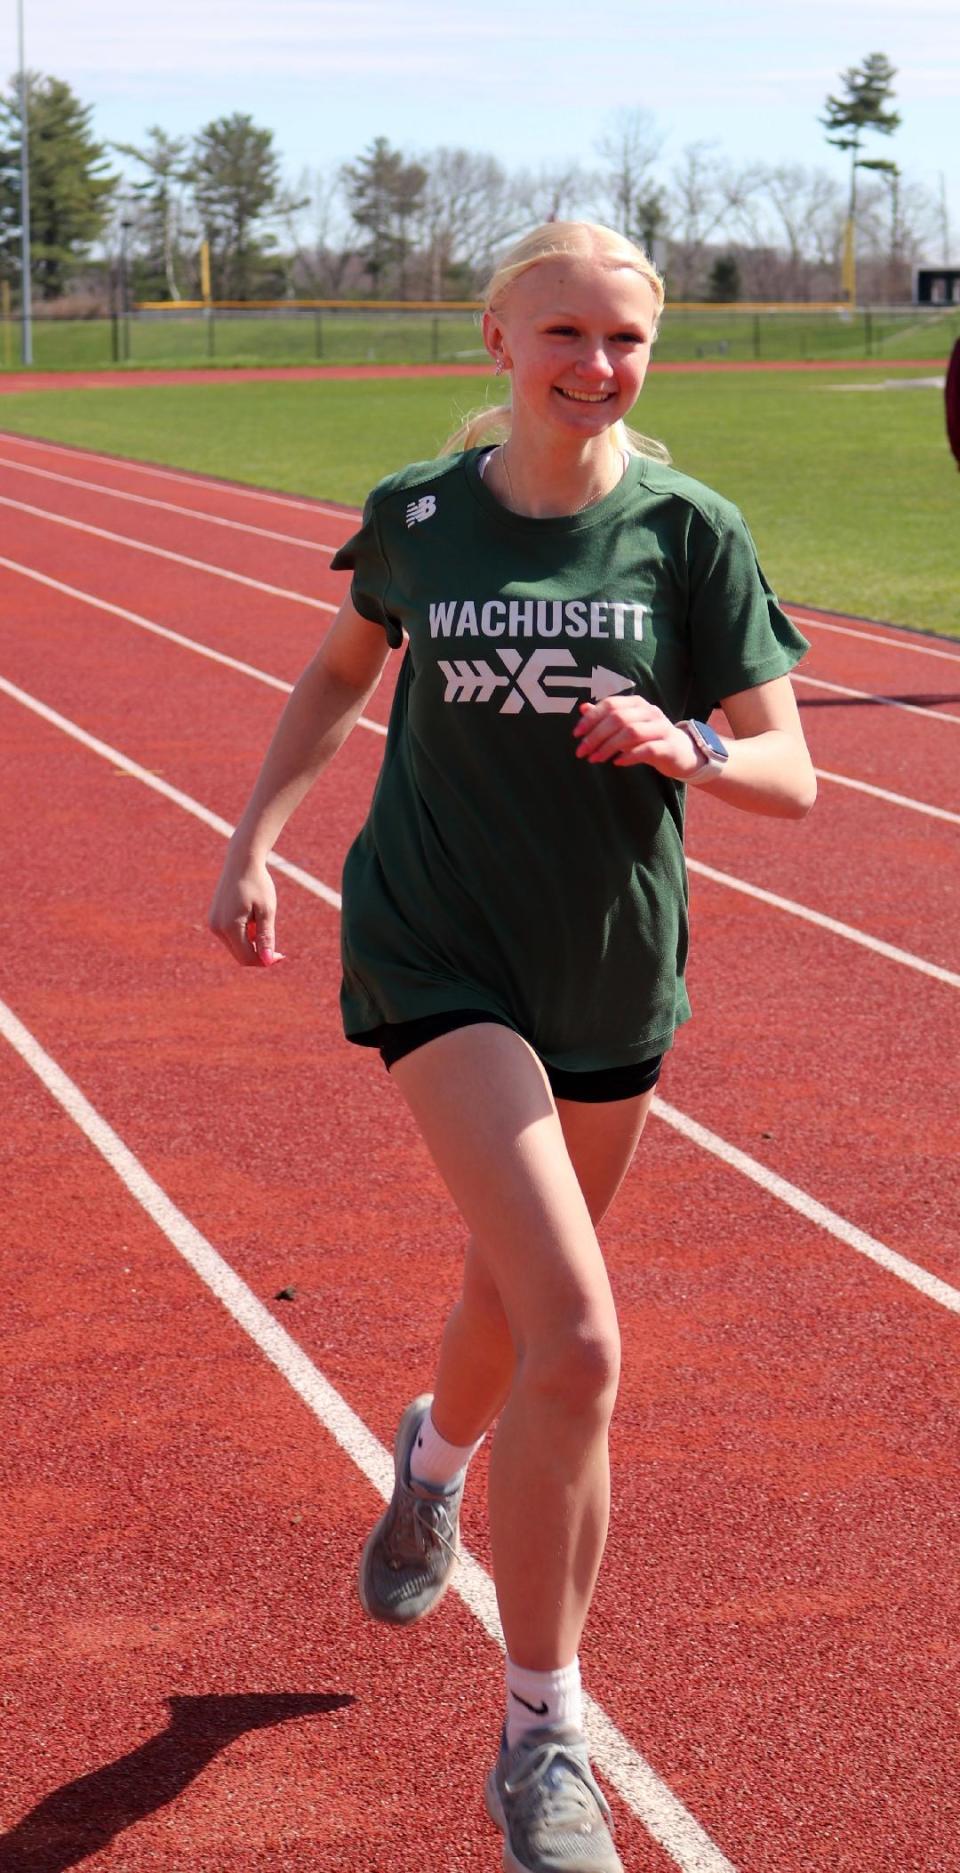 Wachusett Regional's Naomi Witt is the youngest of her family to make a mark on the Central Mass. high school running scene.